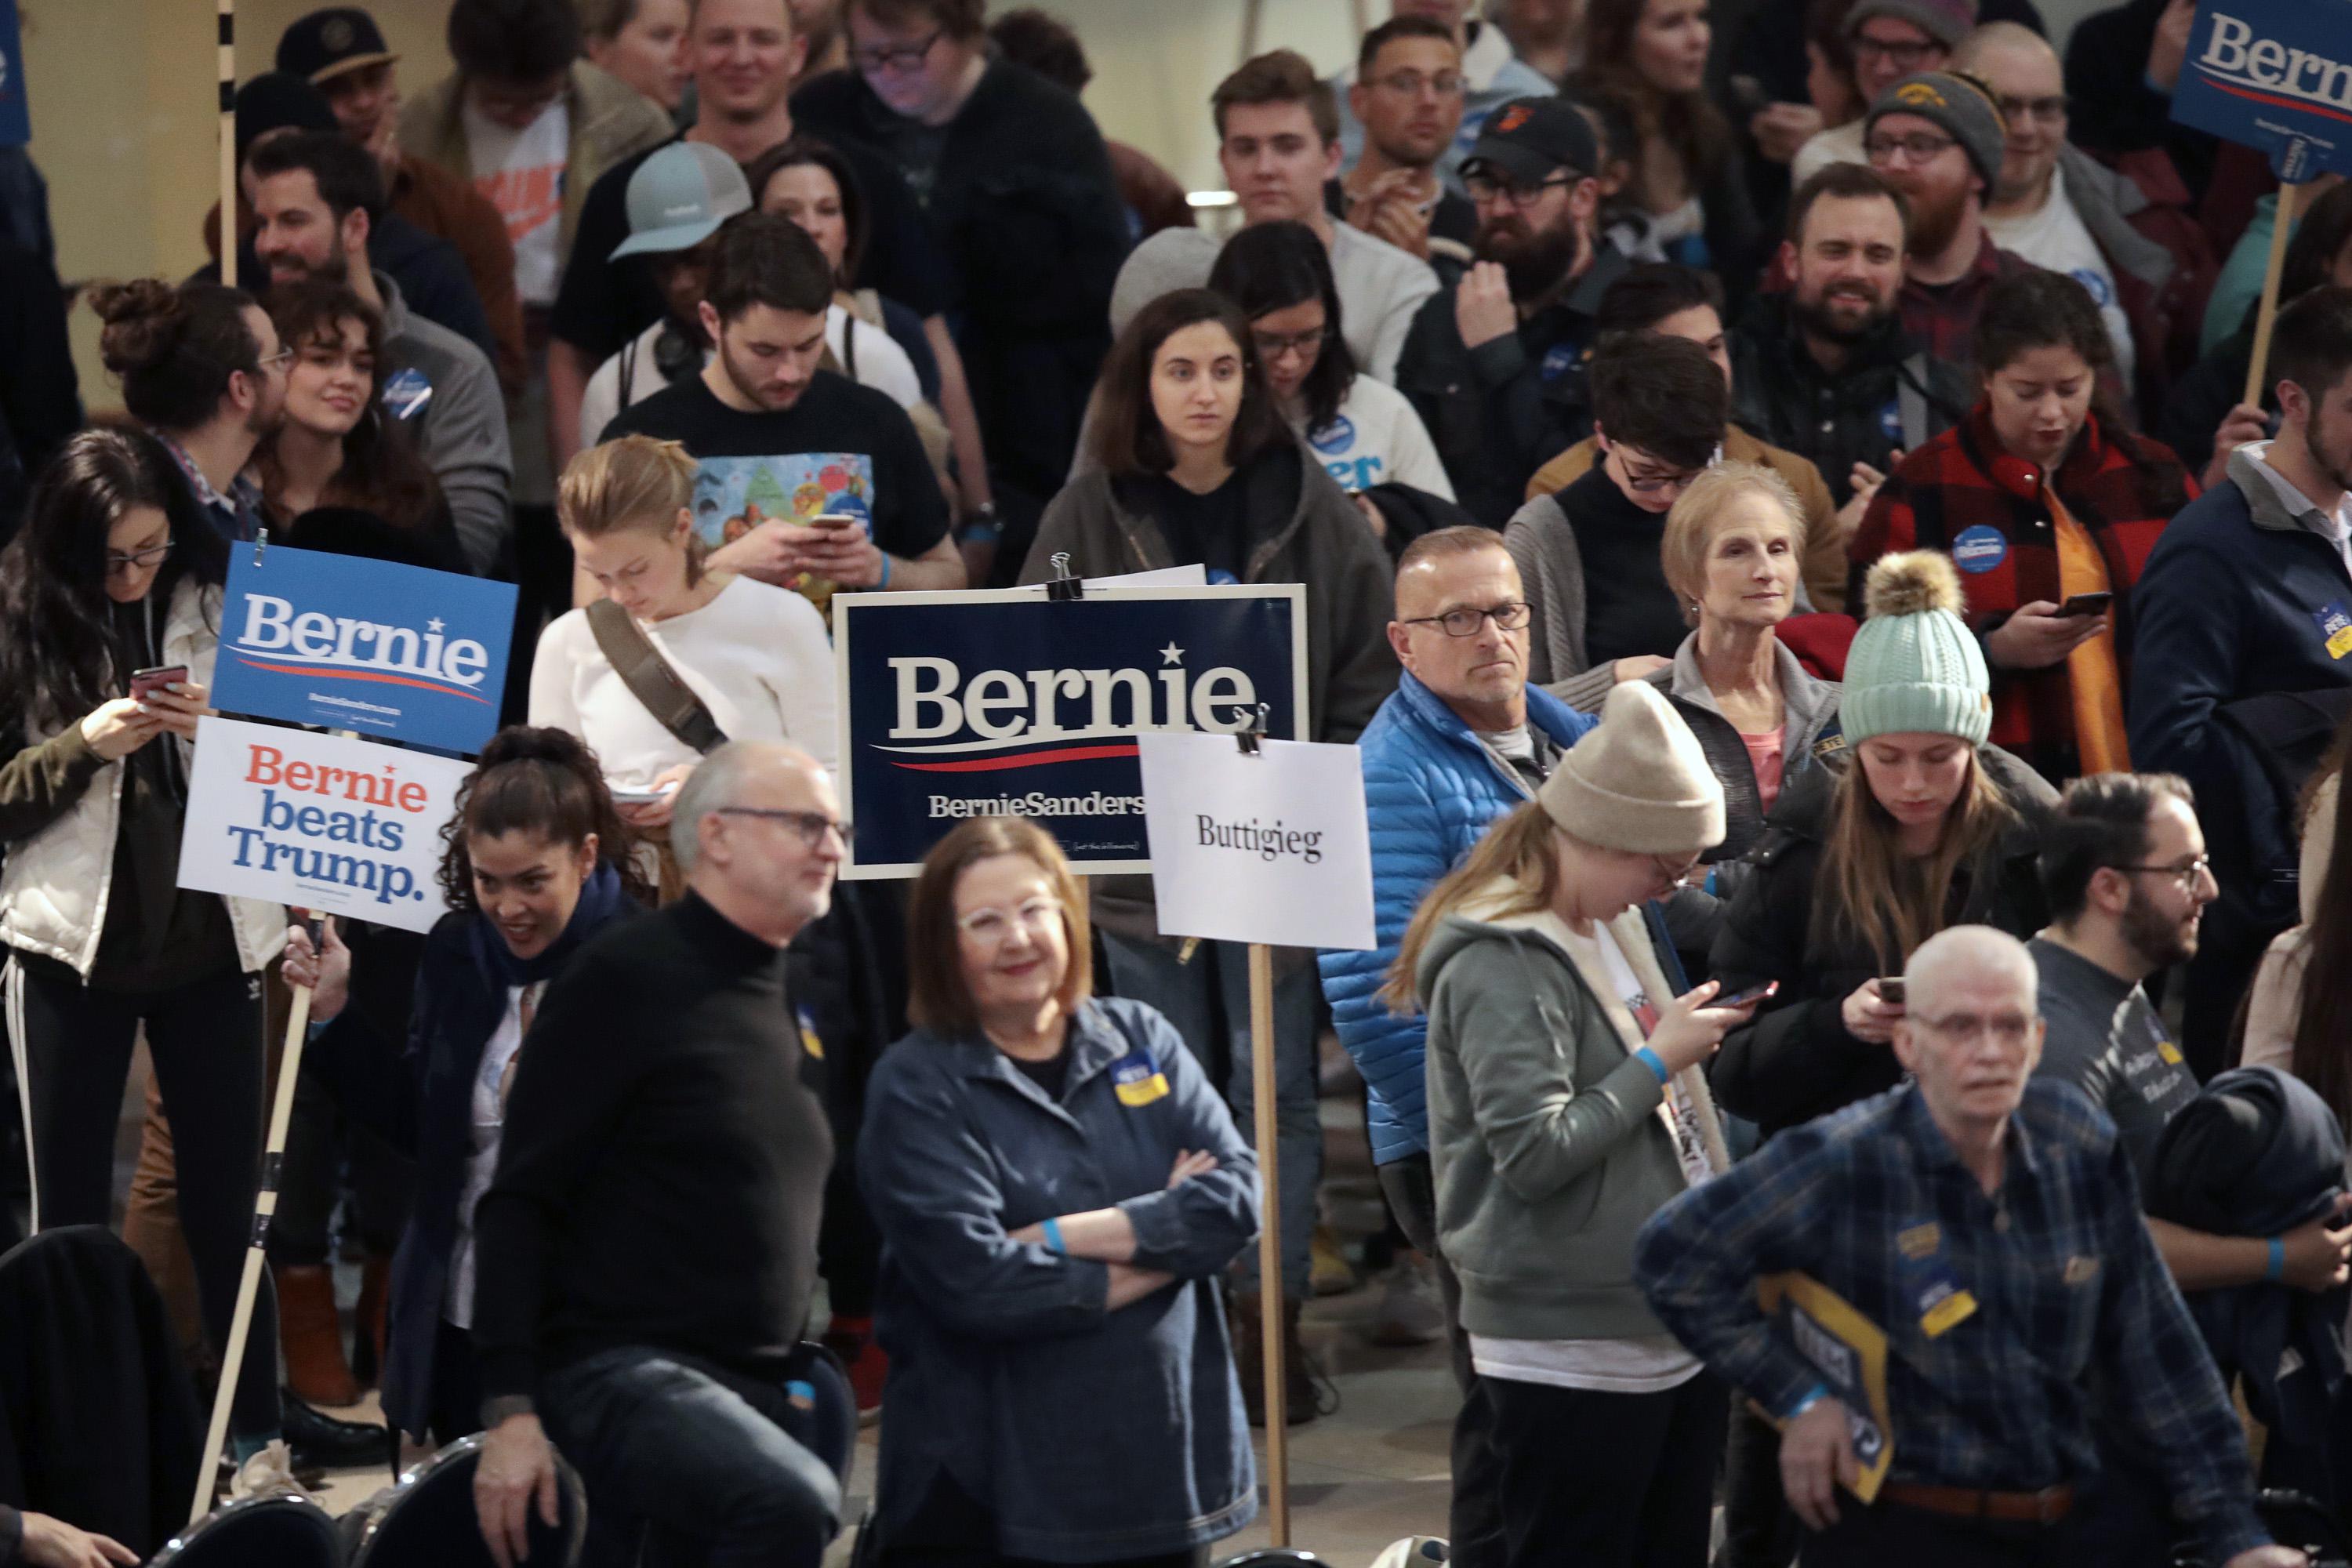 Iowa residents attend a caucus to select a Democratic nominee for president on February 03, 2020 in Des Moines, Iowa. 